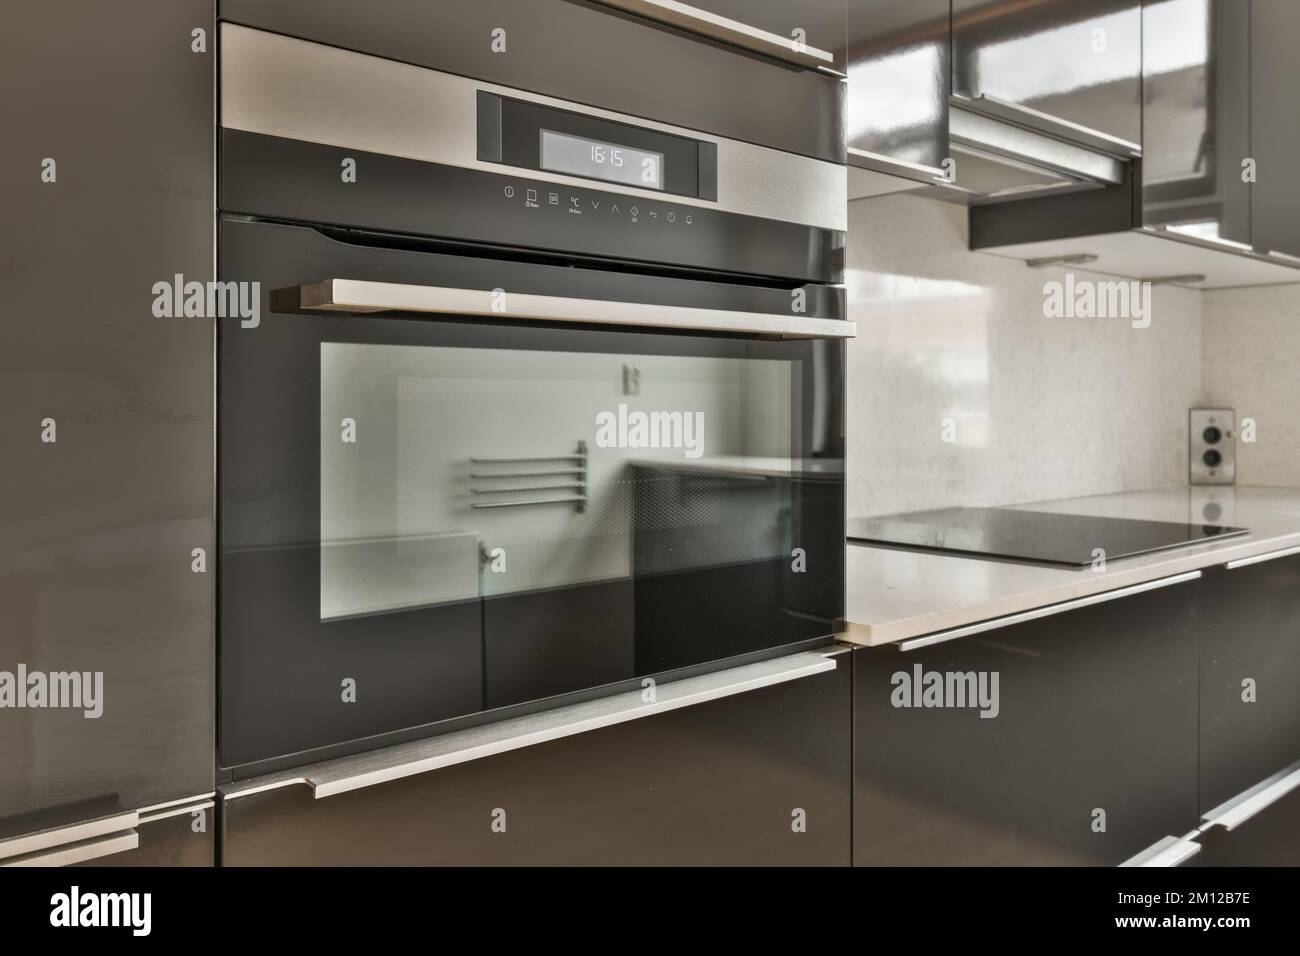 a modern kitchen with black cabinets and stainless steel appliances on the counter tops, in this case is an oven Stock Photo